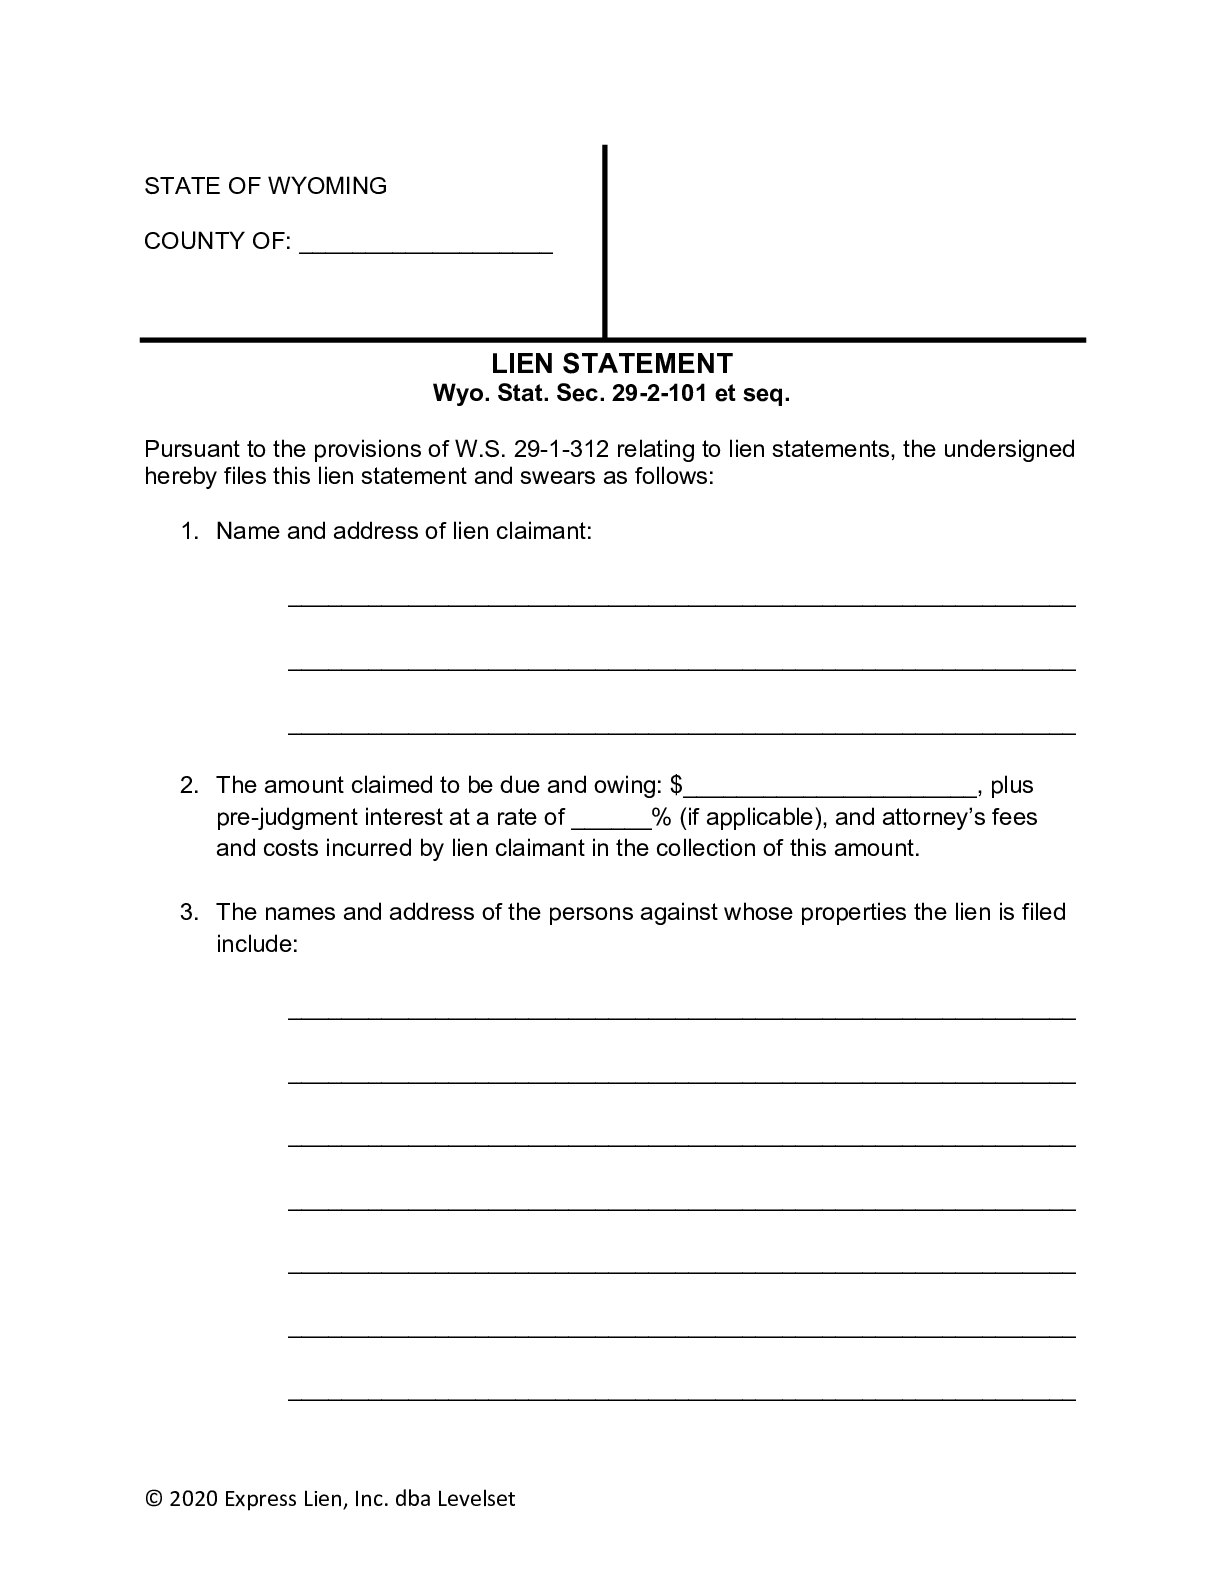 Wyoming Mechanics Lien Form - free from